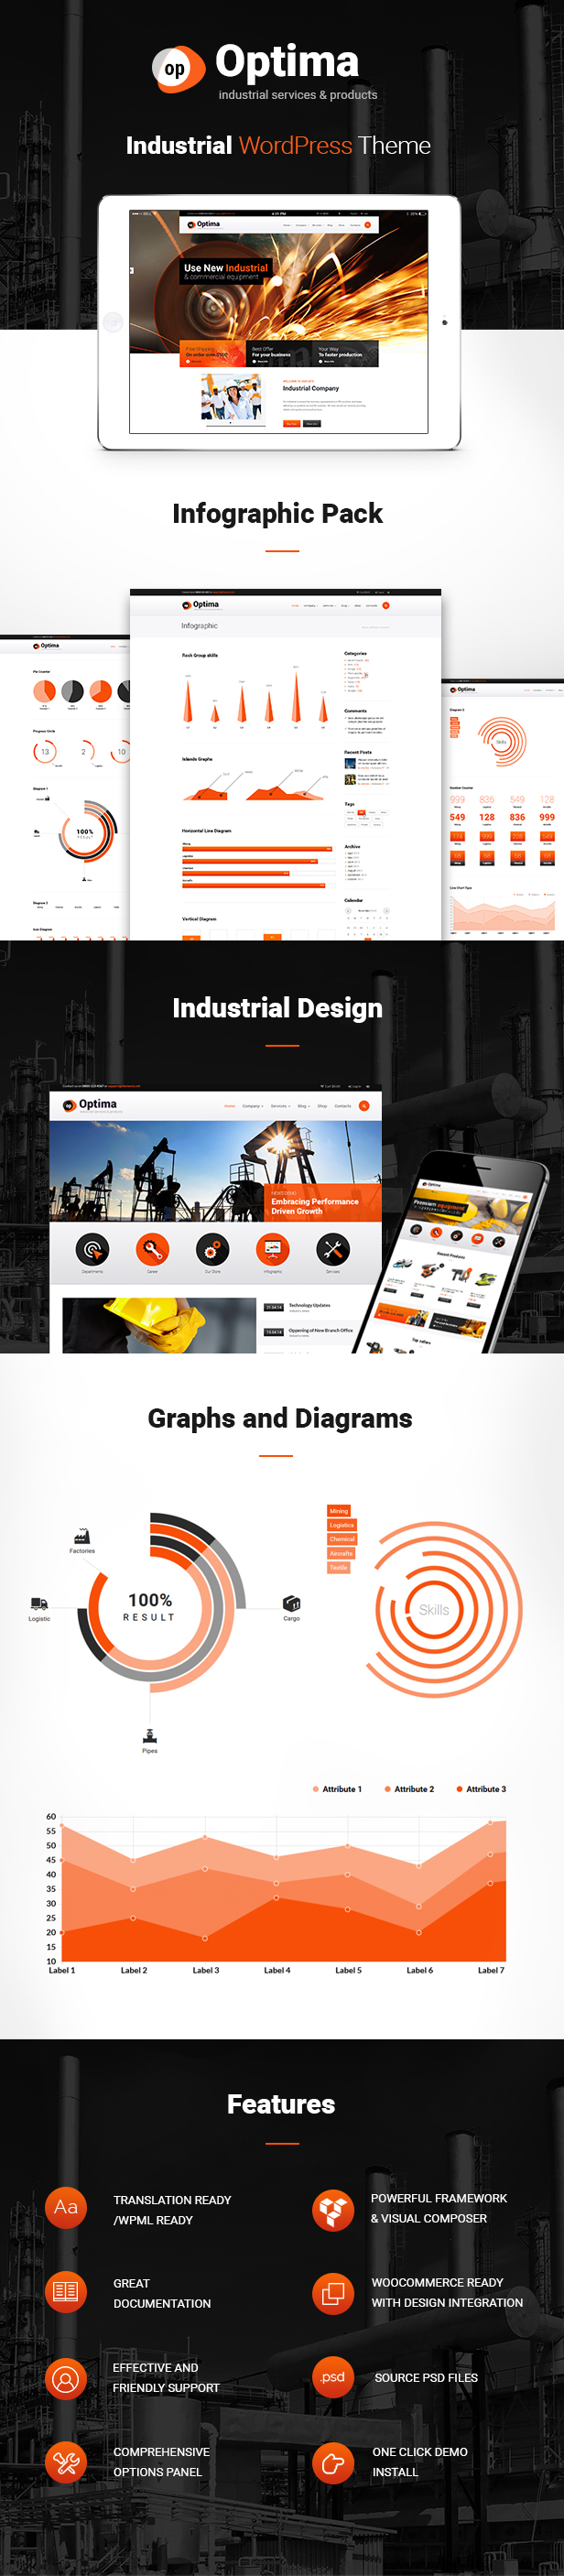 Industrial WordPress Theme features